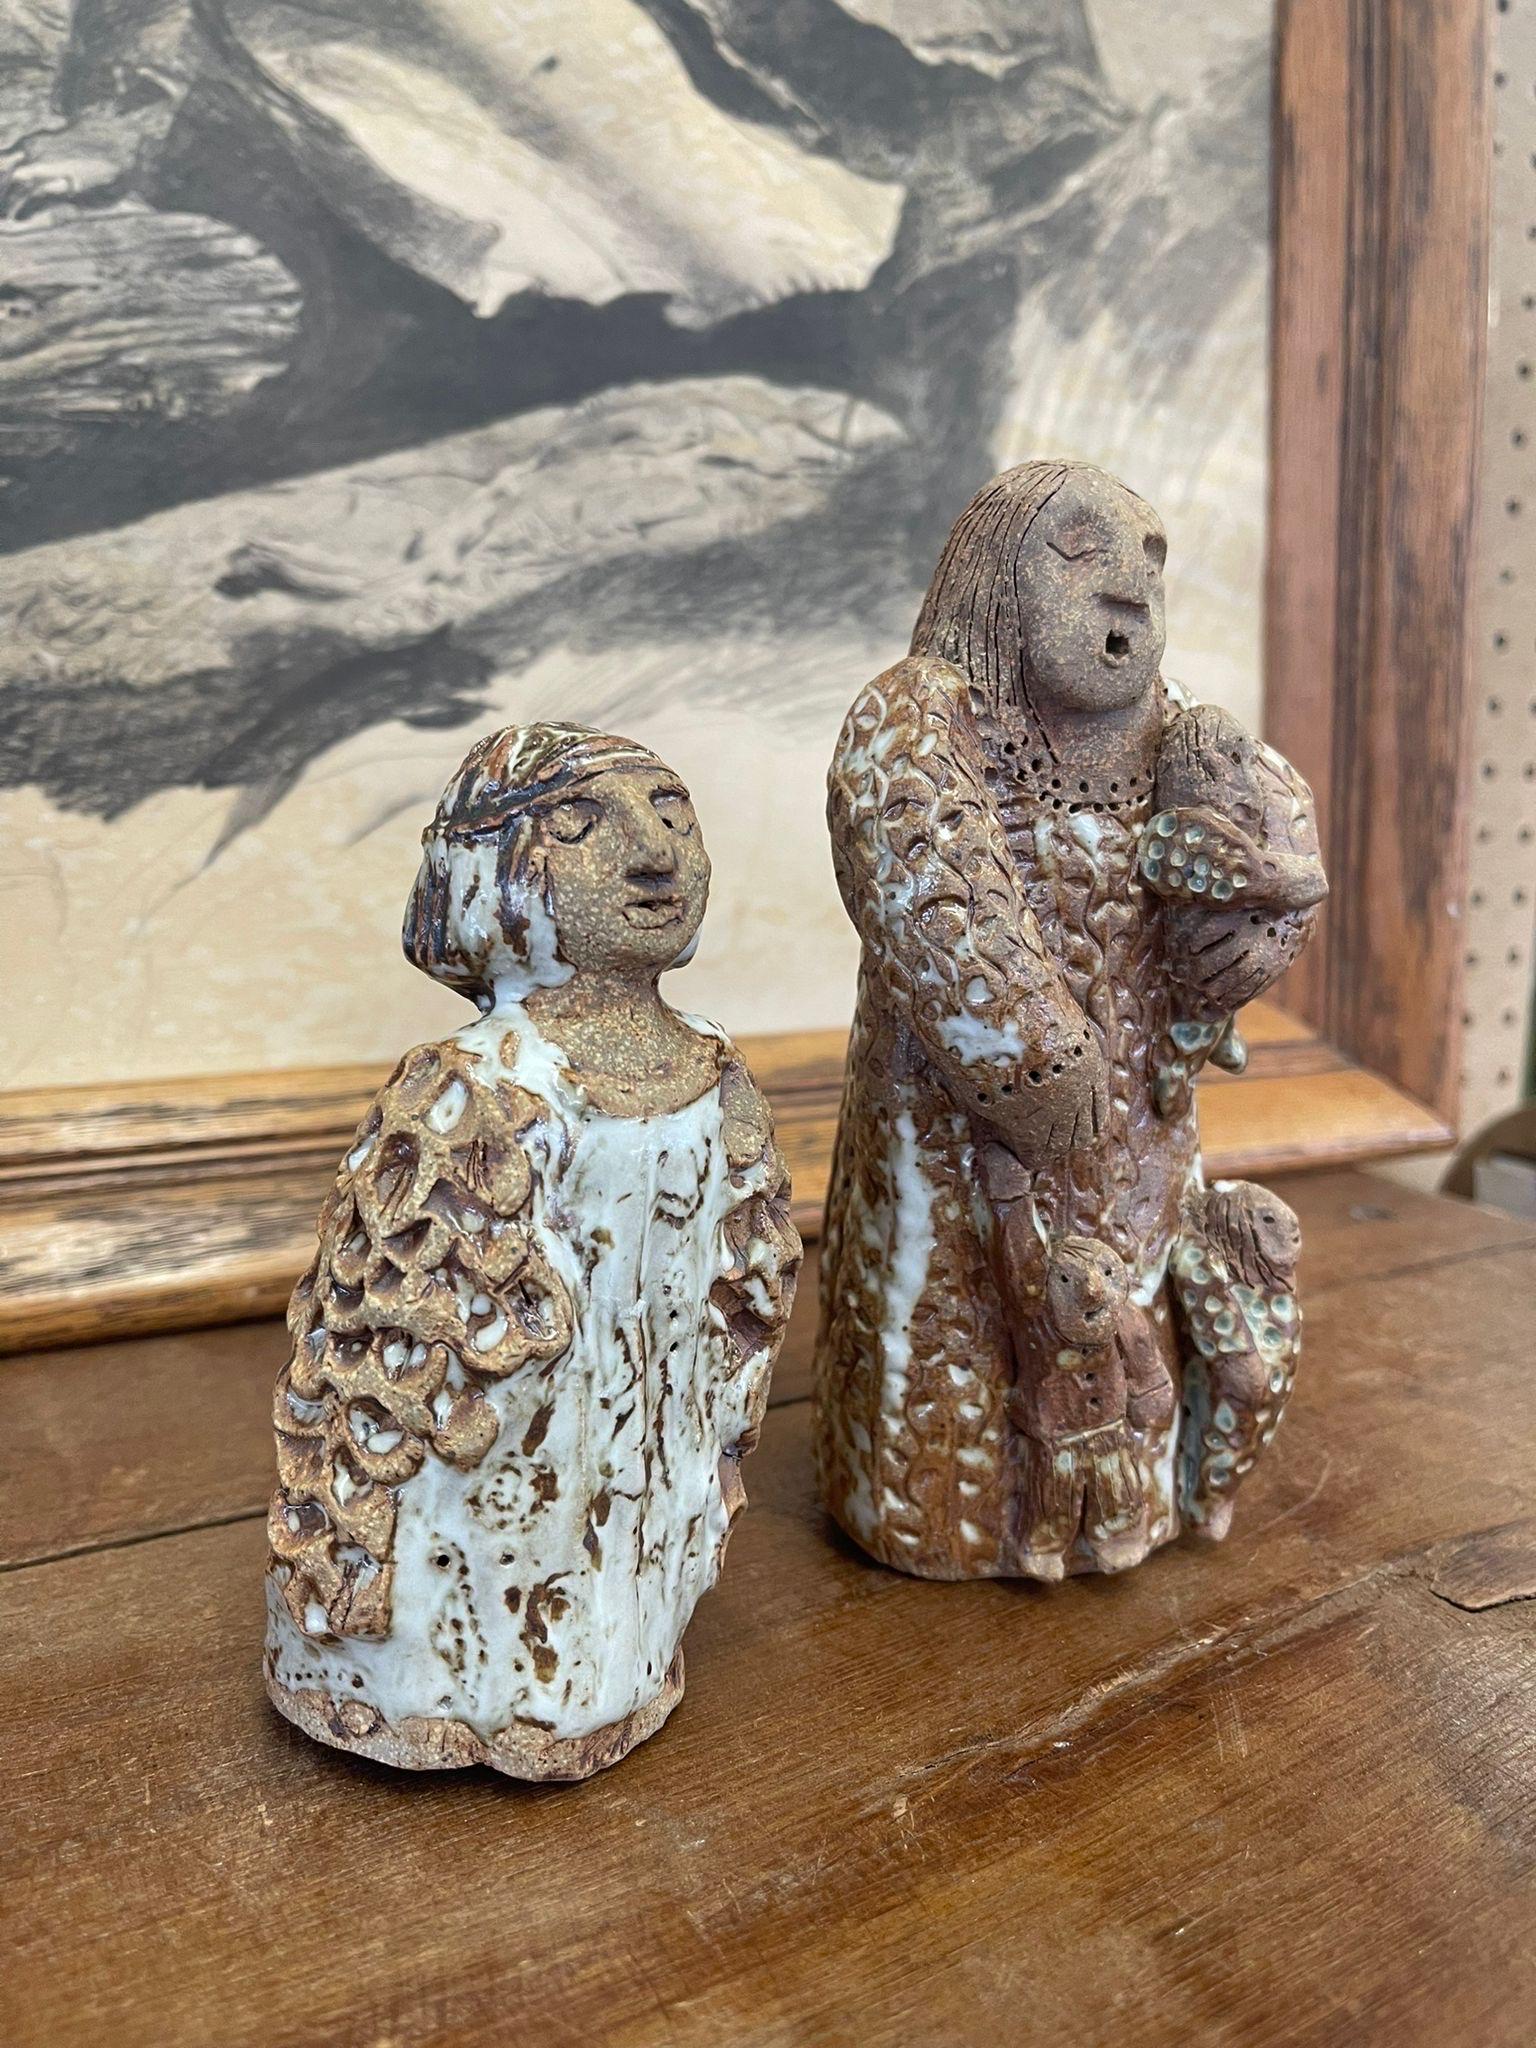 This set of Ceramic figurines have white glazing and intricate floral design. Makers mark on the bottom by Gretchen Bear in 2012. Vintage Condition Consistent with Age as Pictured.

Dimensions. Larger. 3 W ; 3 D ; 6 1/2 H
                   Smaller.